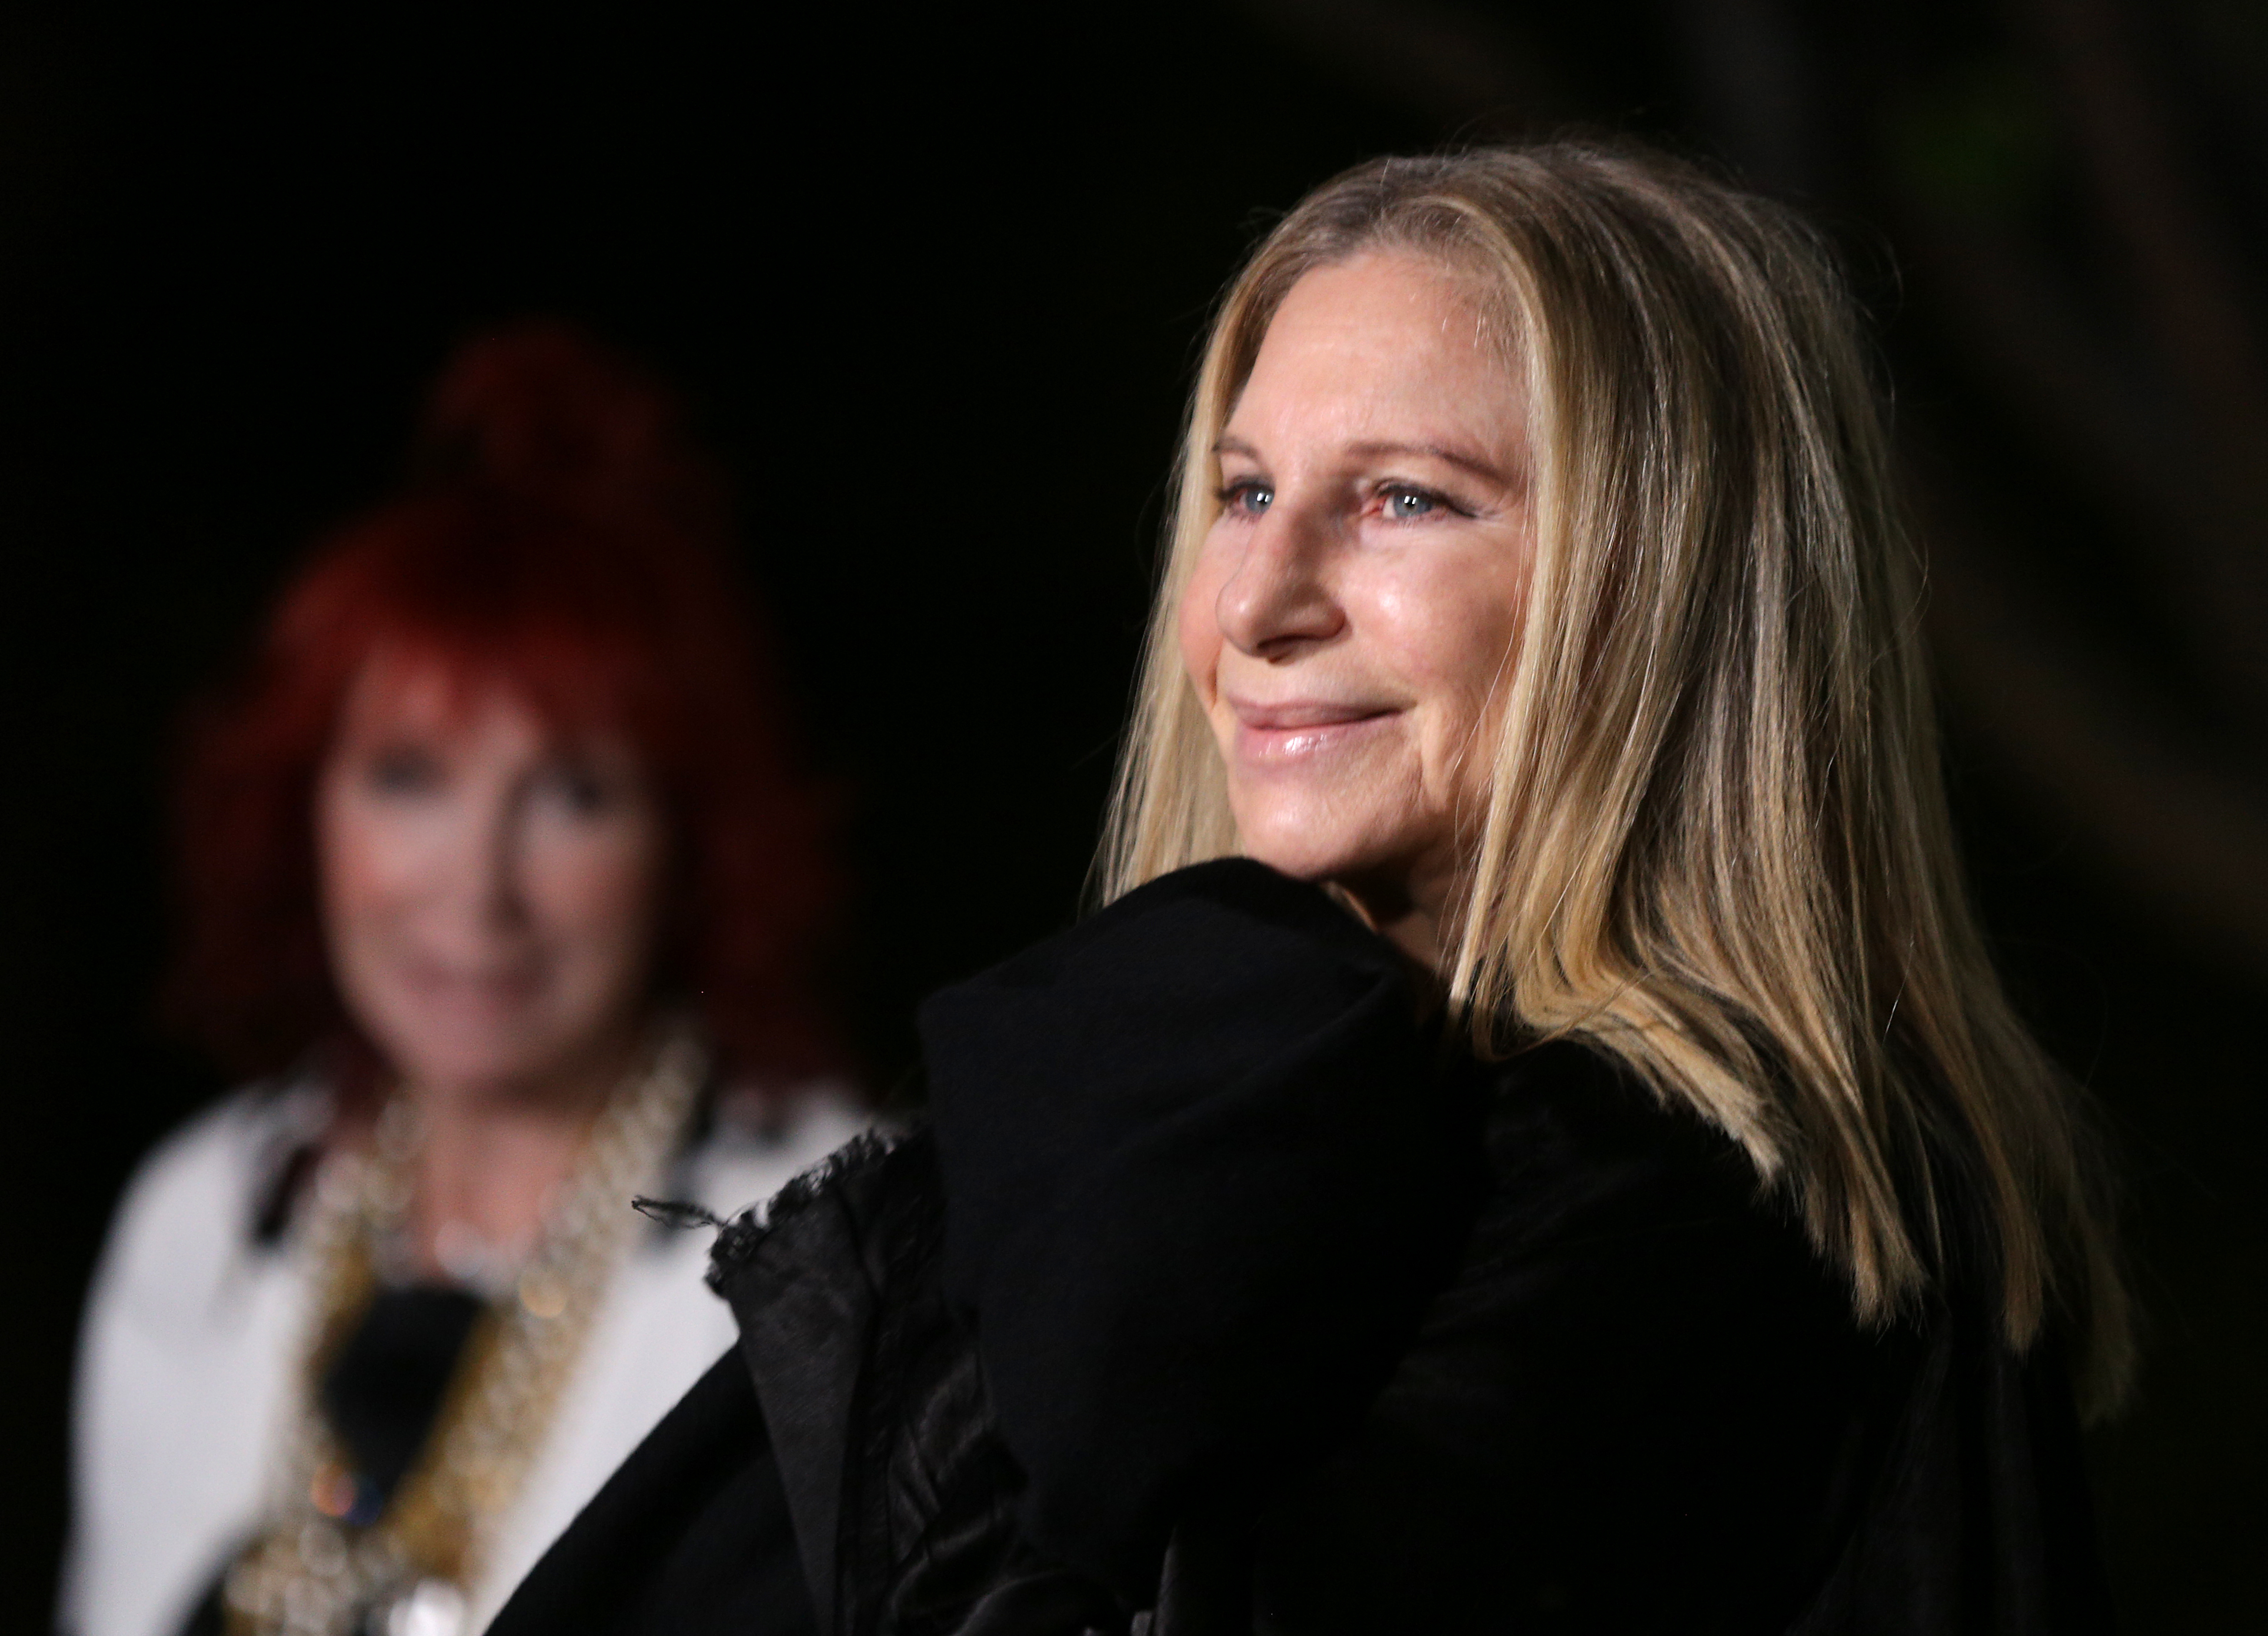 Barbra Streisand in profile wearing a black outfit at an evening event